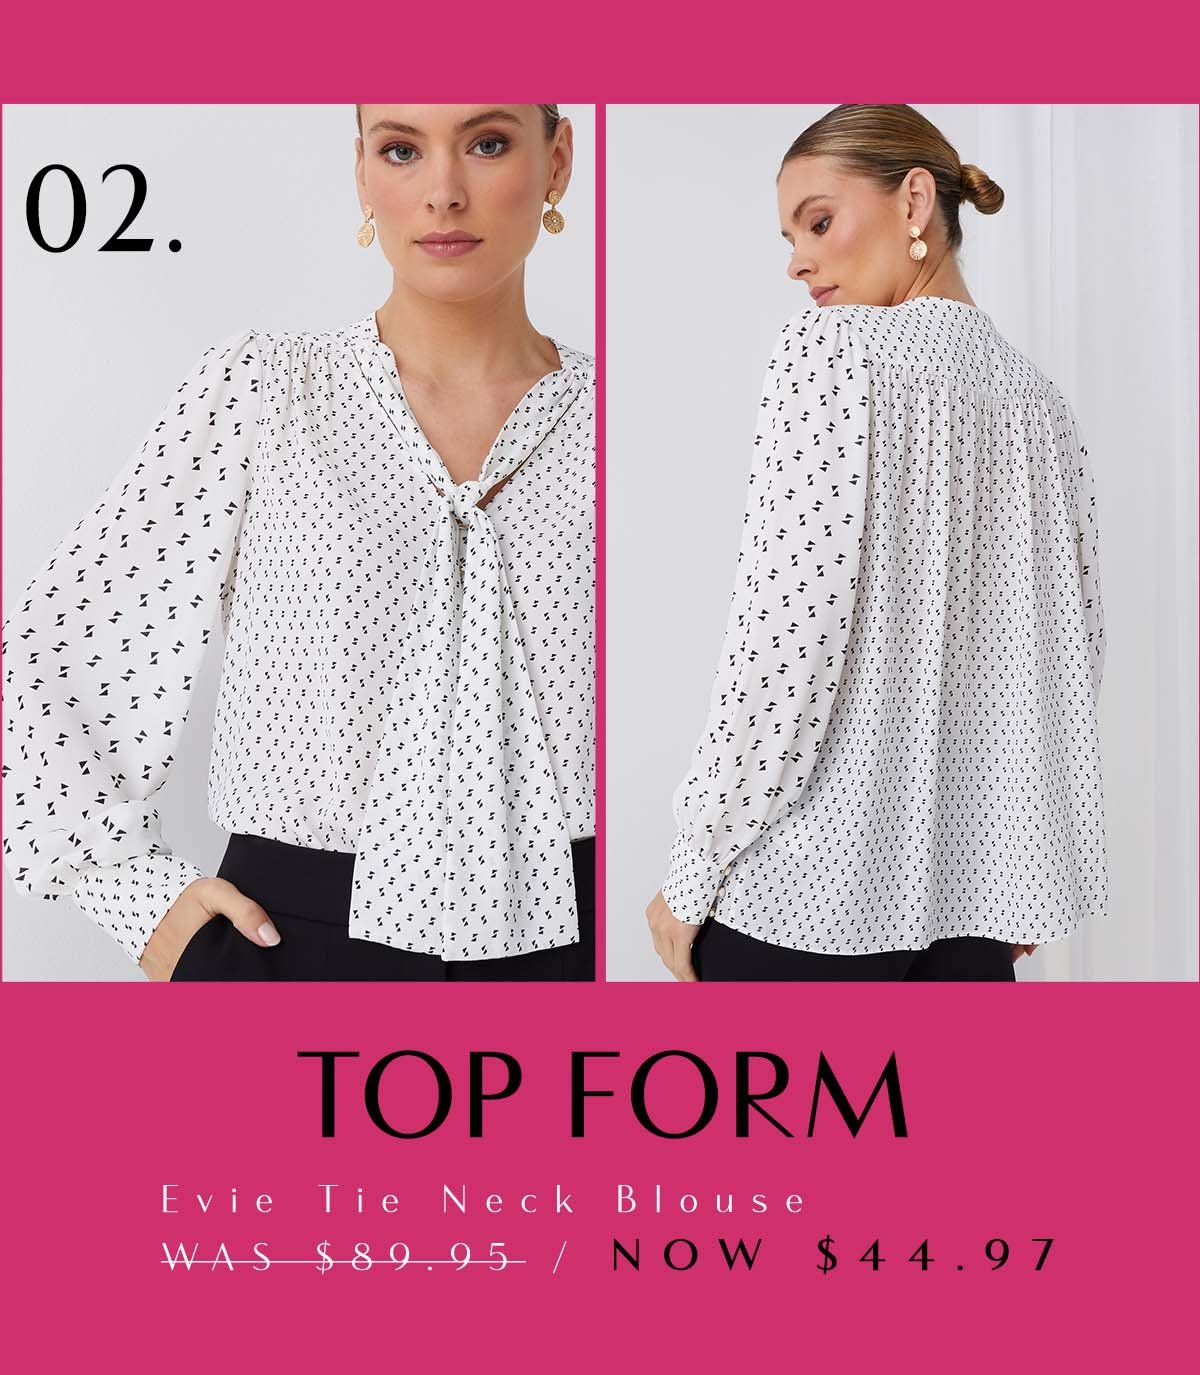 02. Top Form. Evie Tie Neck Blouse WAS $89.95 / NOW $53.97